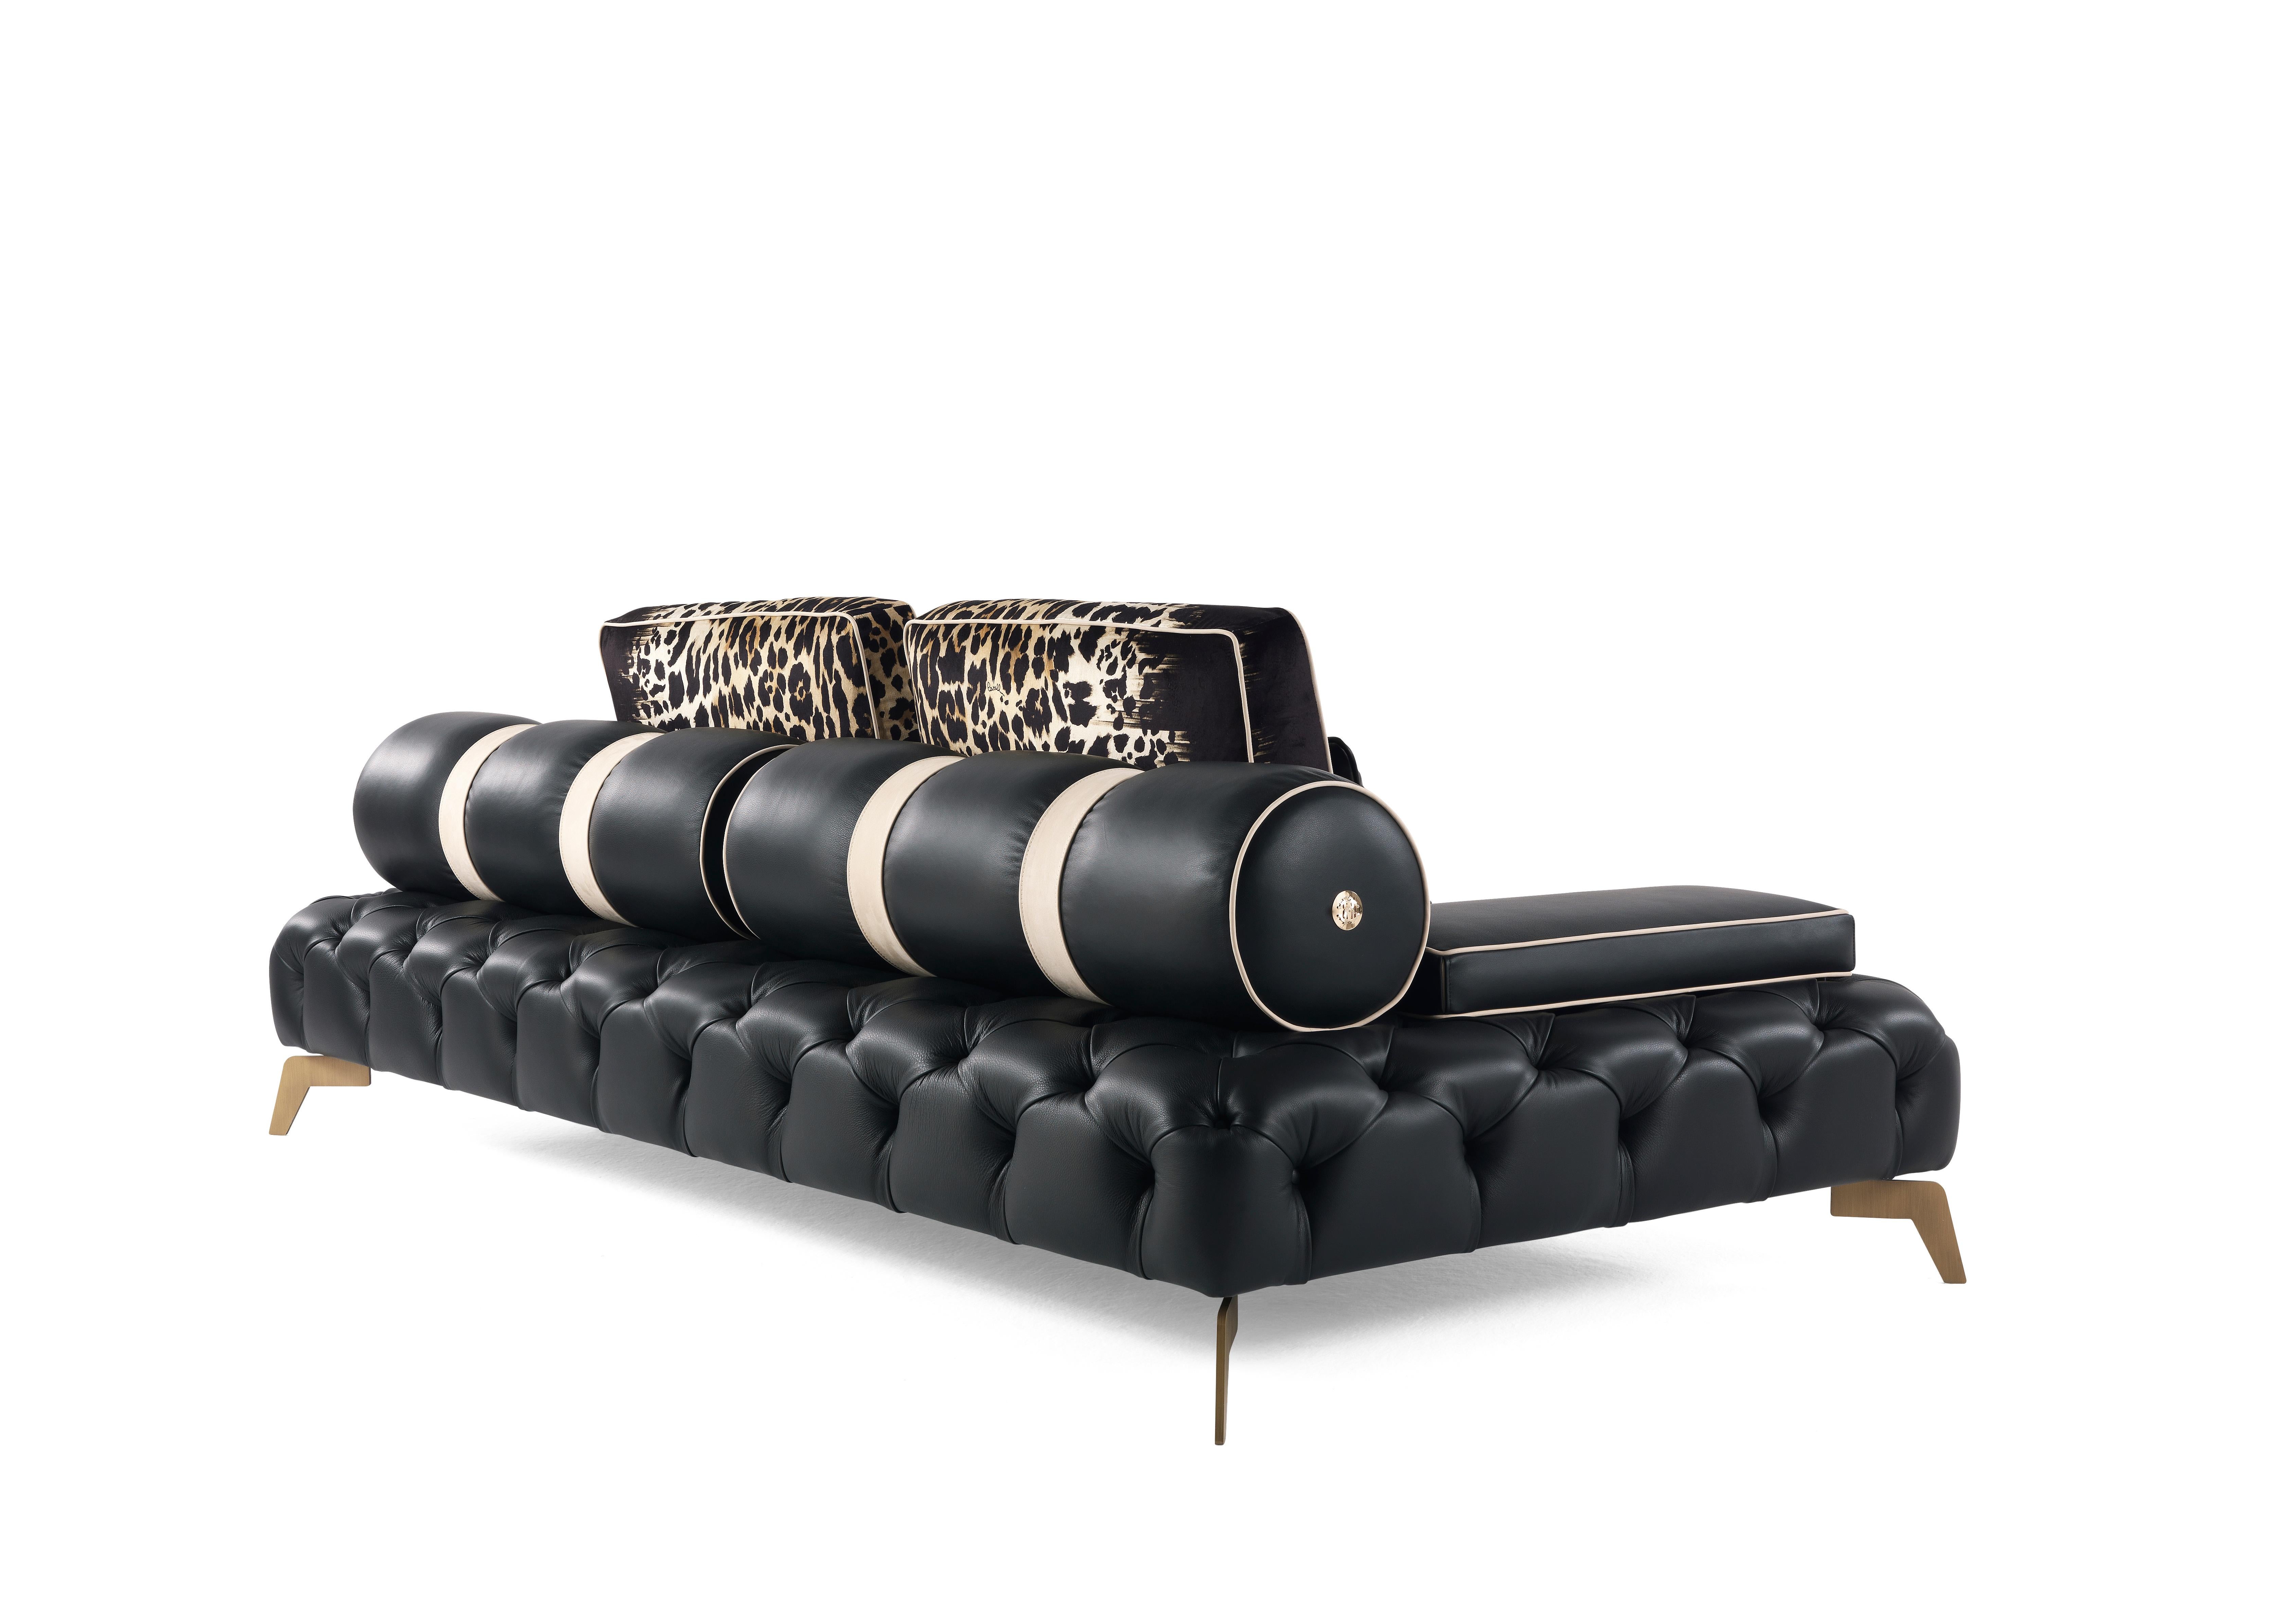 21st Century Darlington Sofa in Black Leather by Roberto Cavalli Home Interiors In New Condition For Sale In Cantù, Lombardia